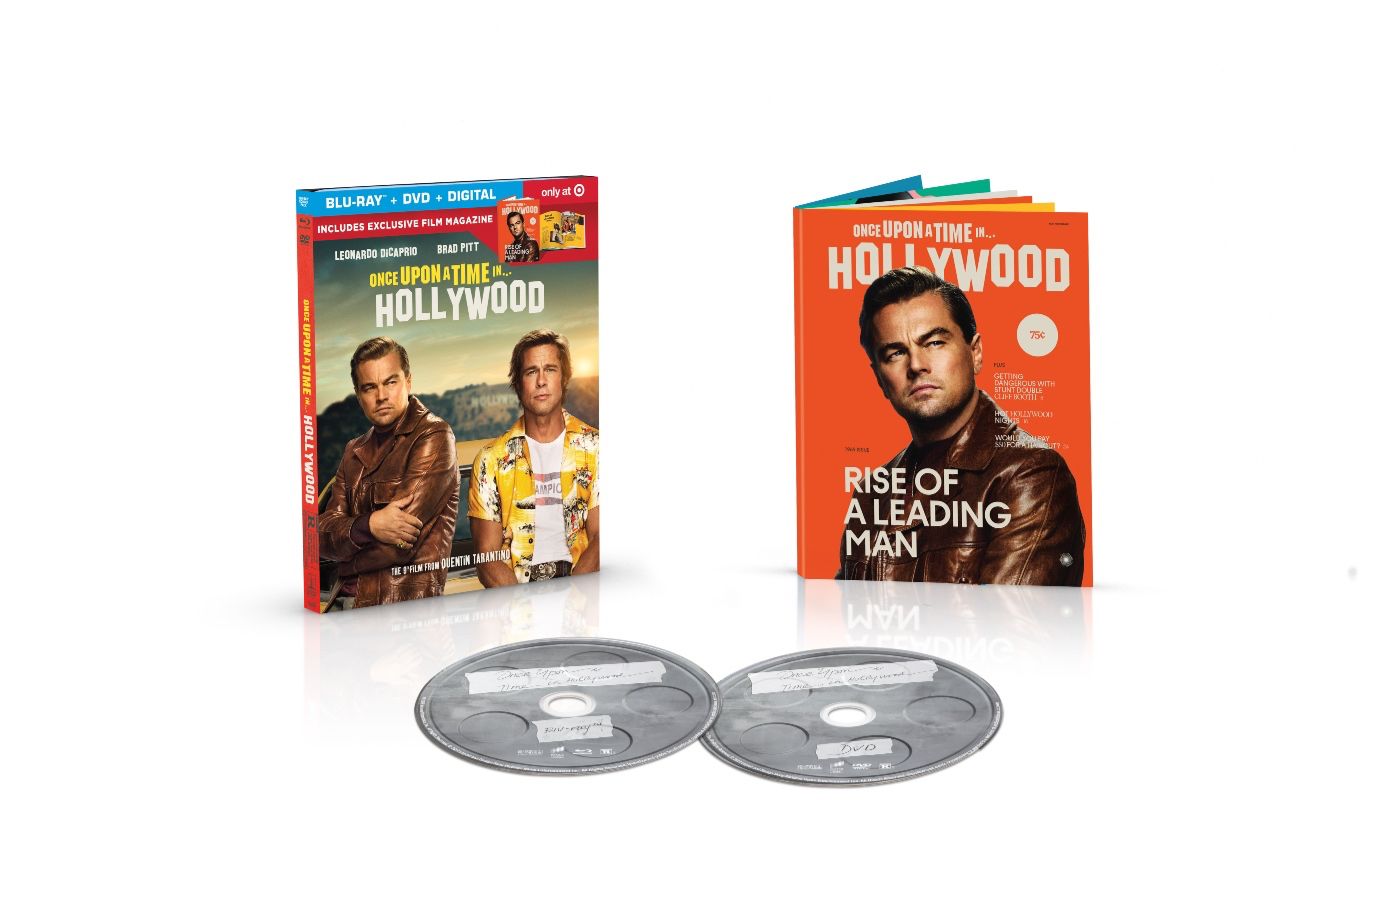 Once Upon a Time in Hollywood Target Blu-ray